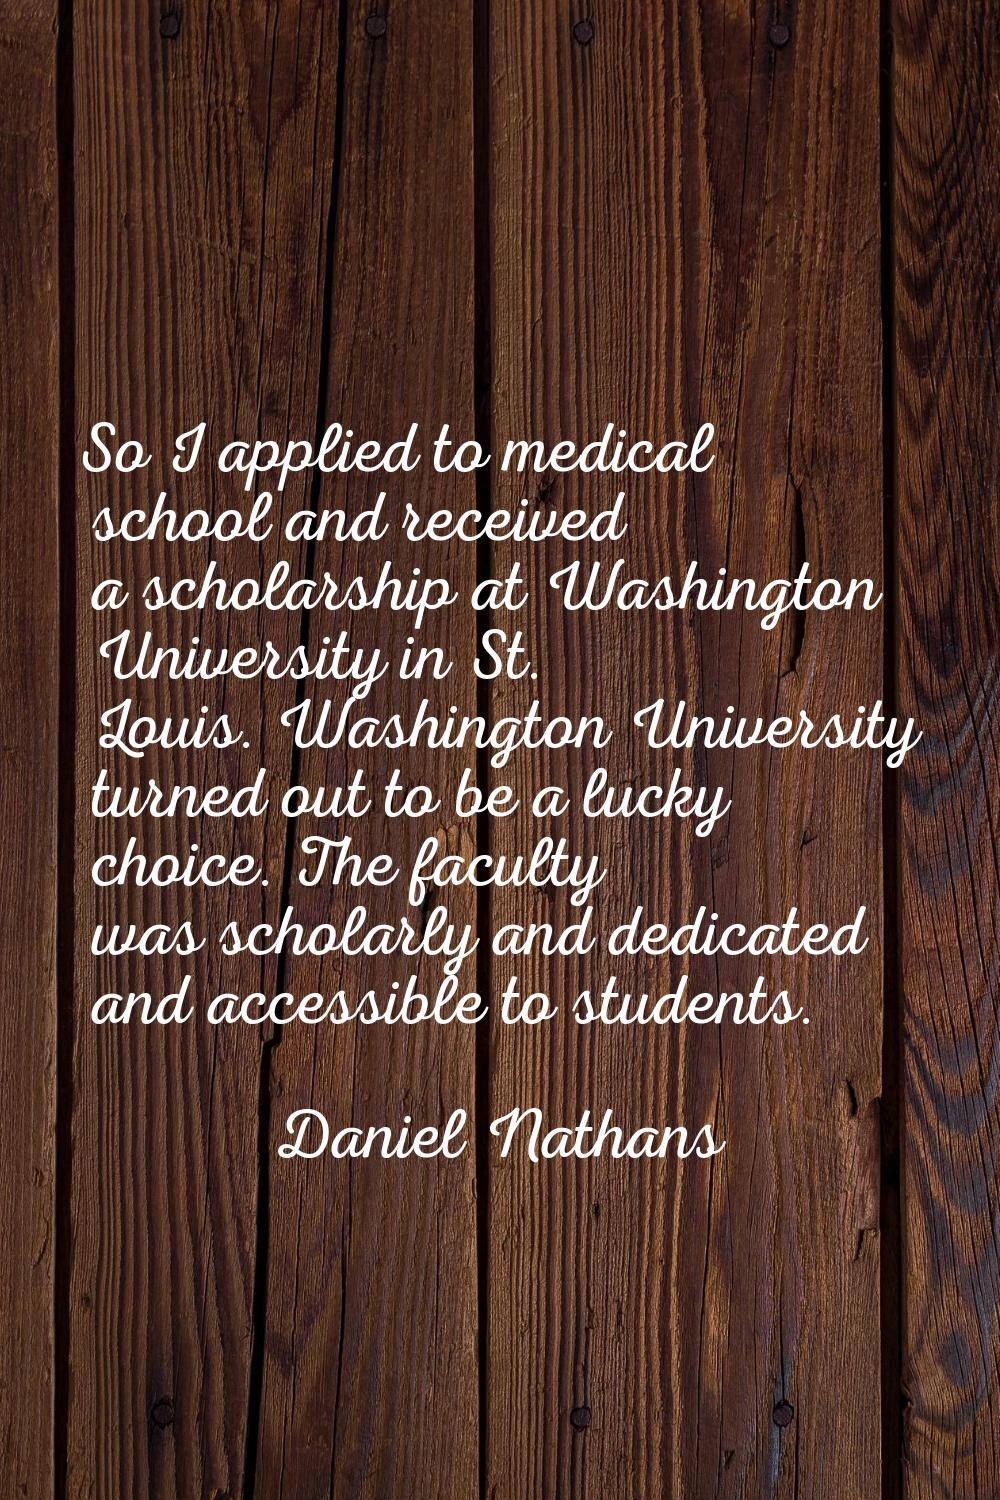 So I applied to medical school and received a scholarship at Washington University in St. Louis. Wa